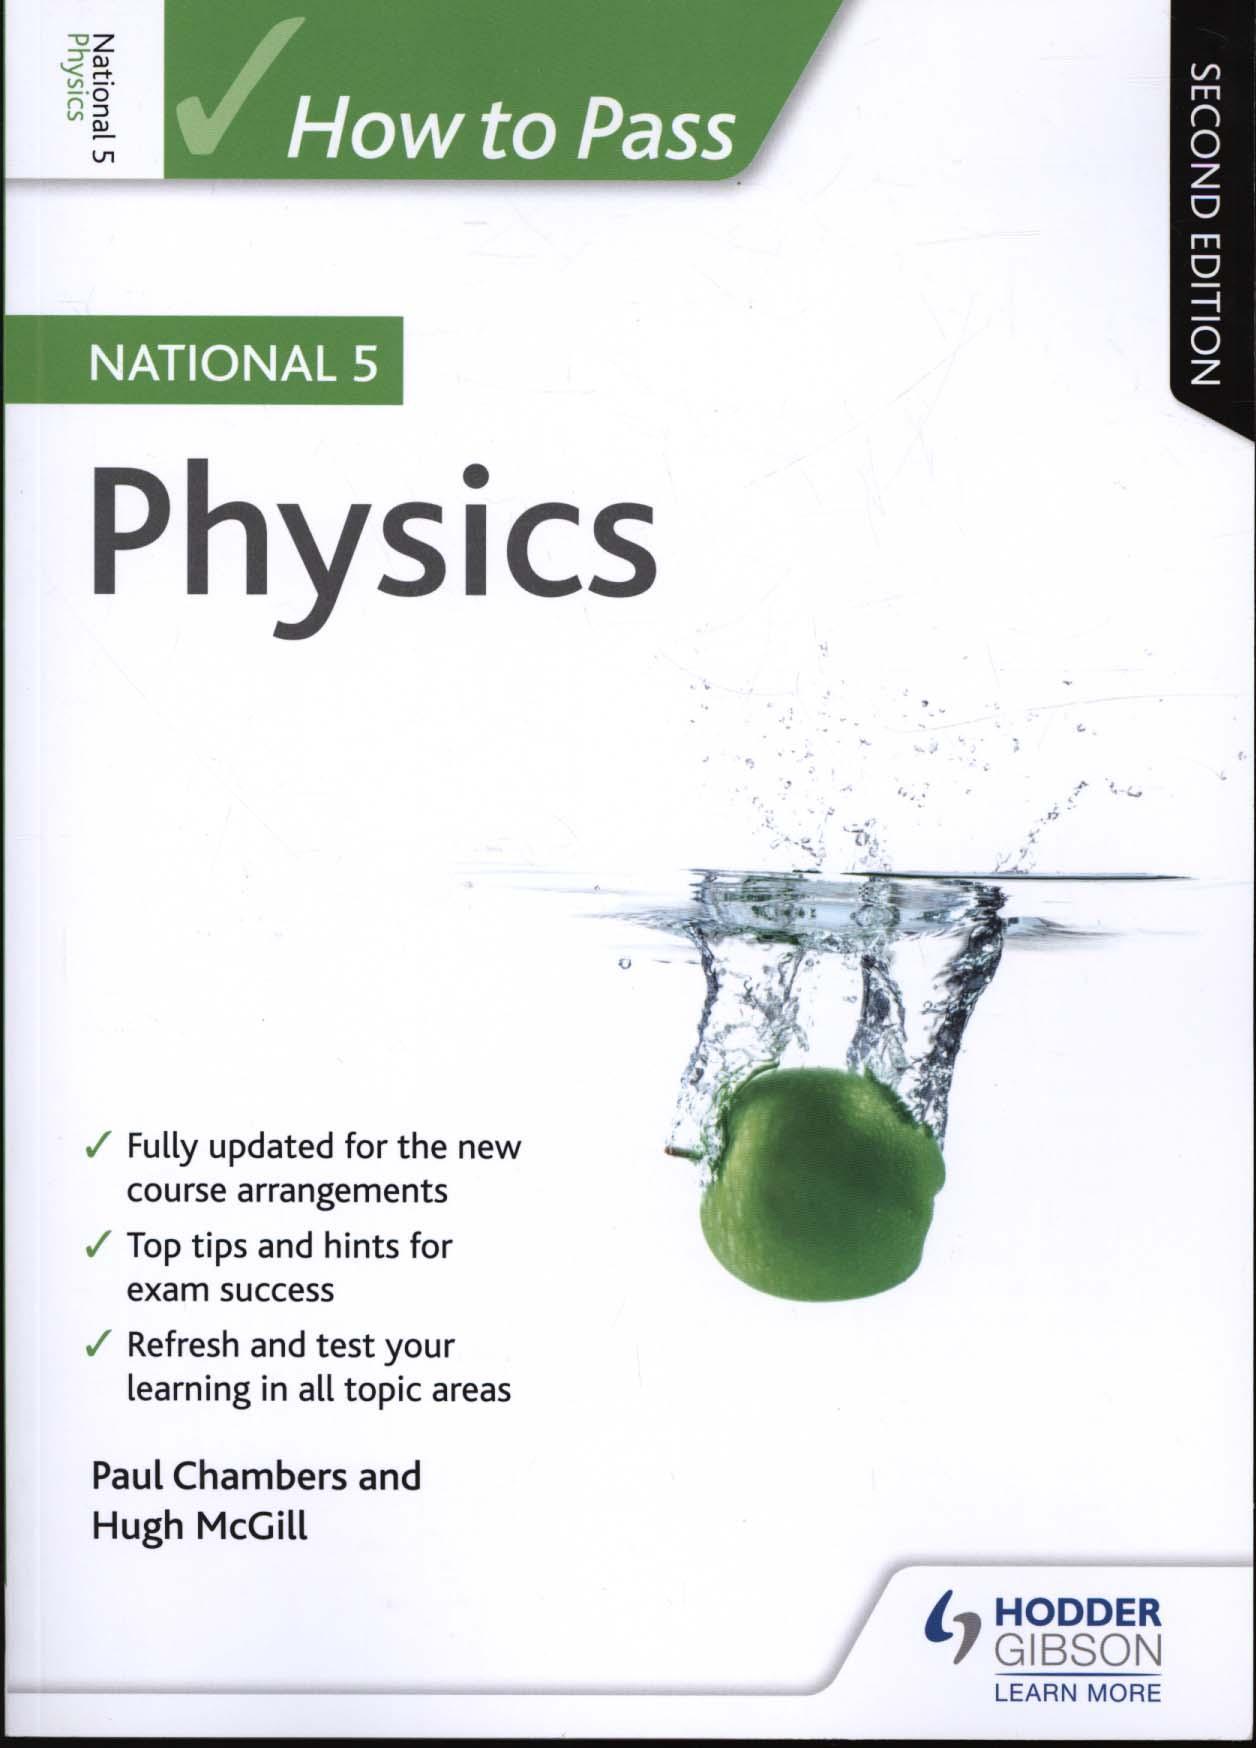 How to Pass National 5 Physics: Second Edition